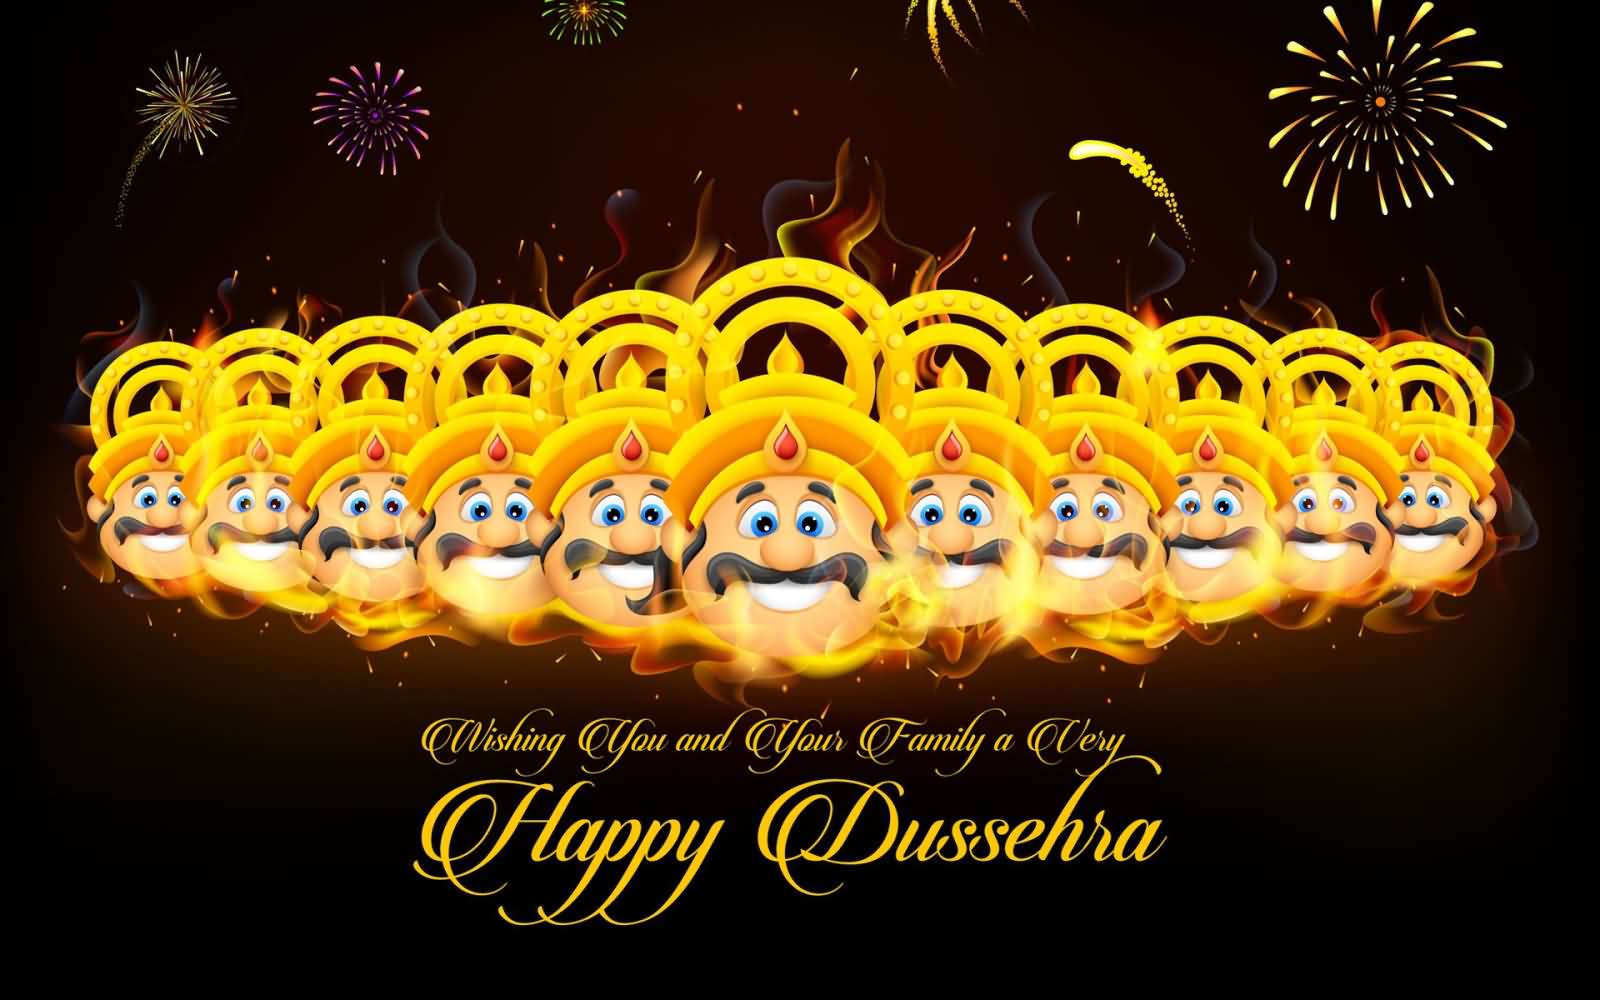 Wishing You And Your Family A Very Happy Dussehra 2016 Wallpaper